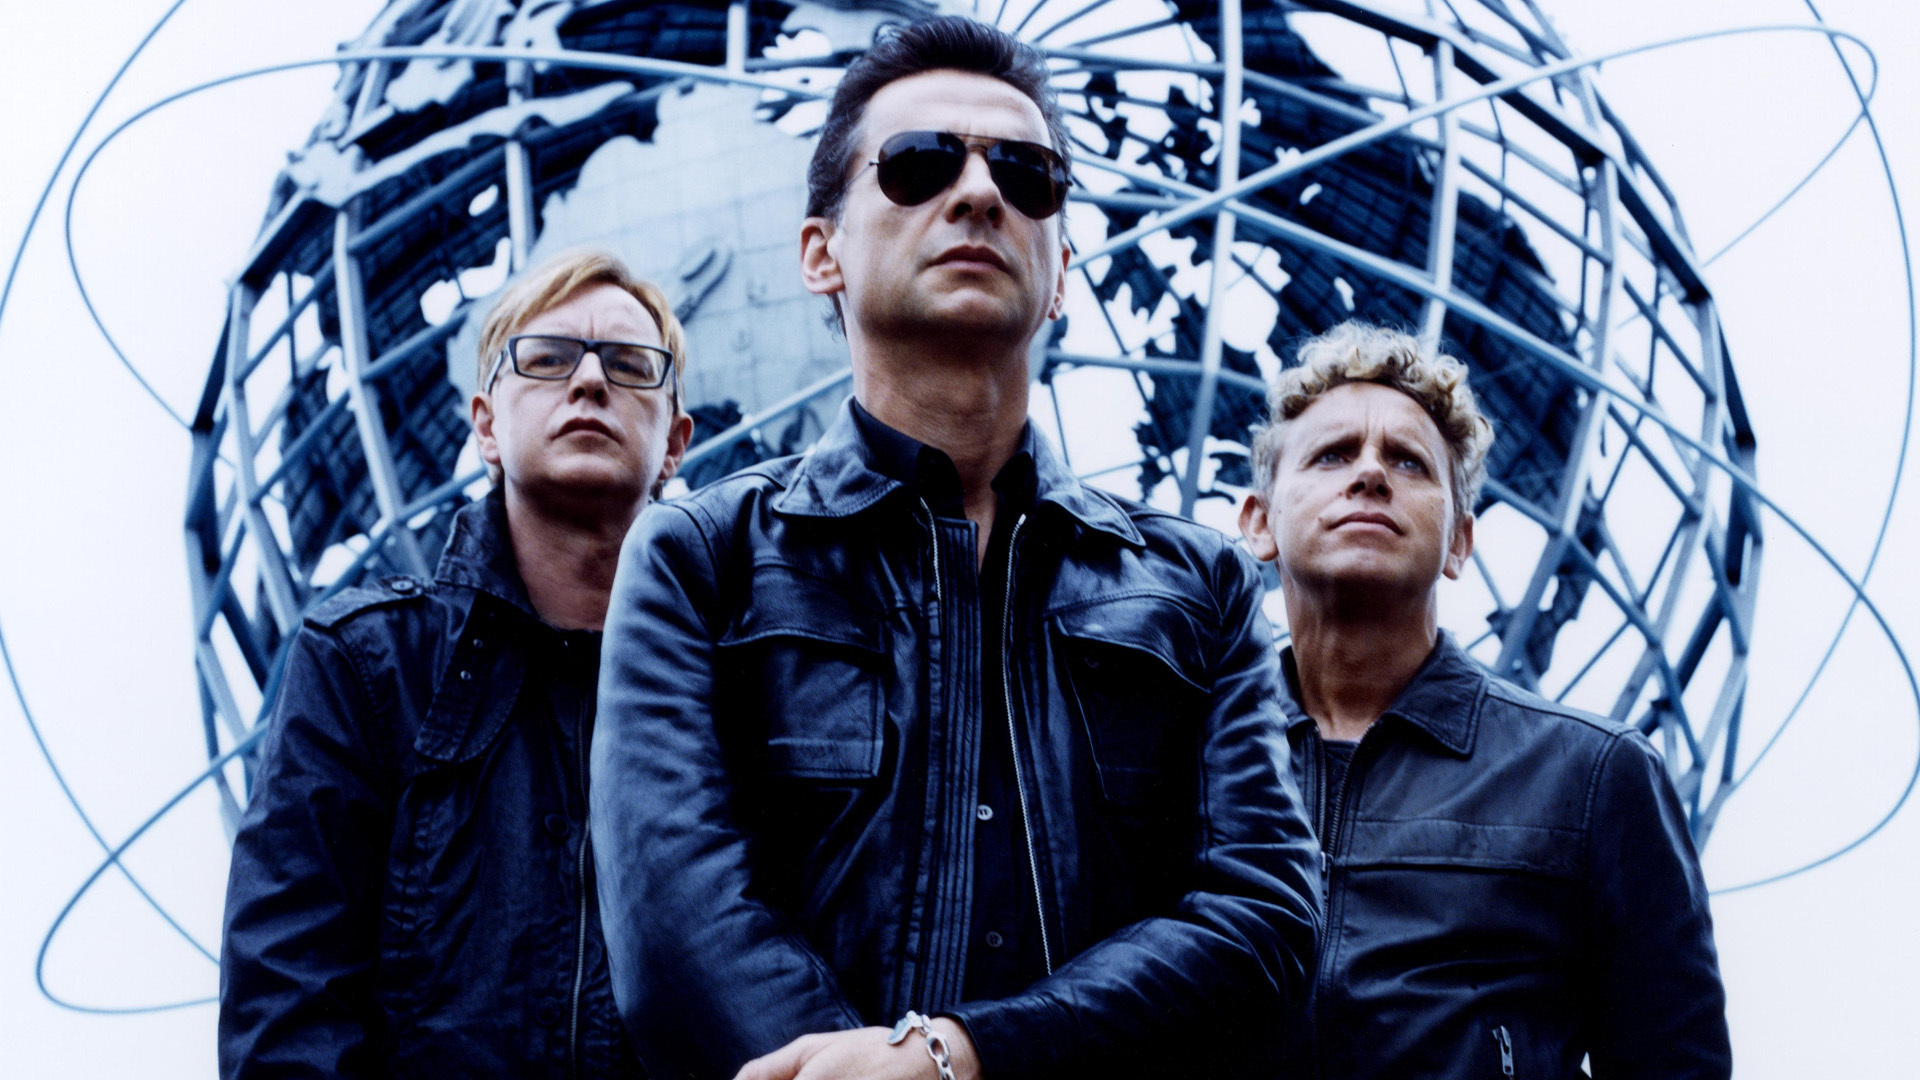 Depeche Mode In First Ever Alliance With Psychedelic Furs On 15th Album